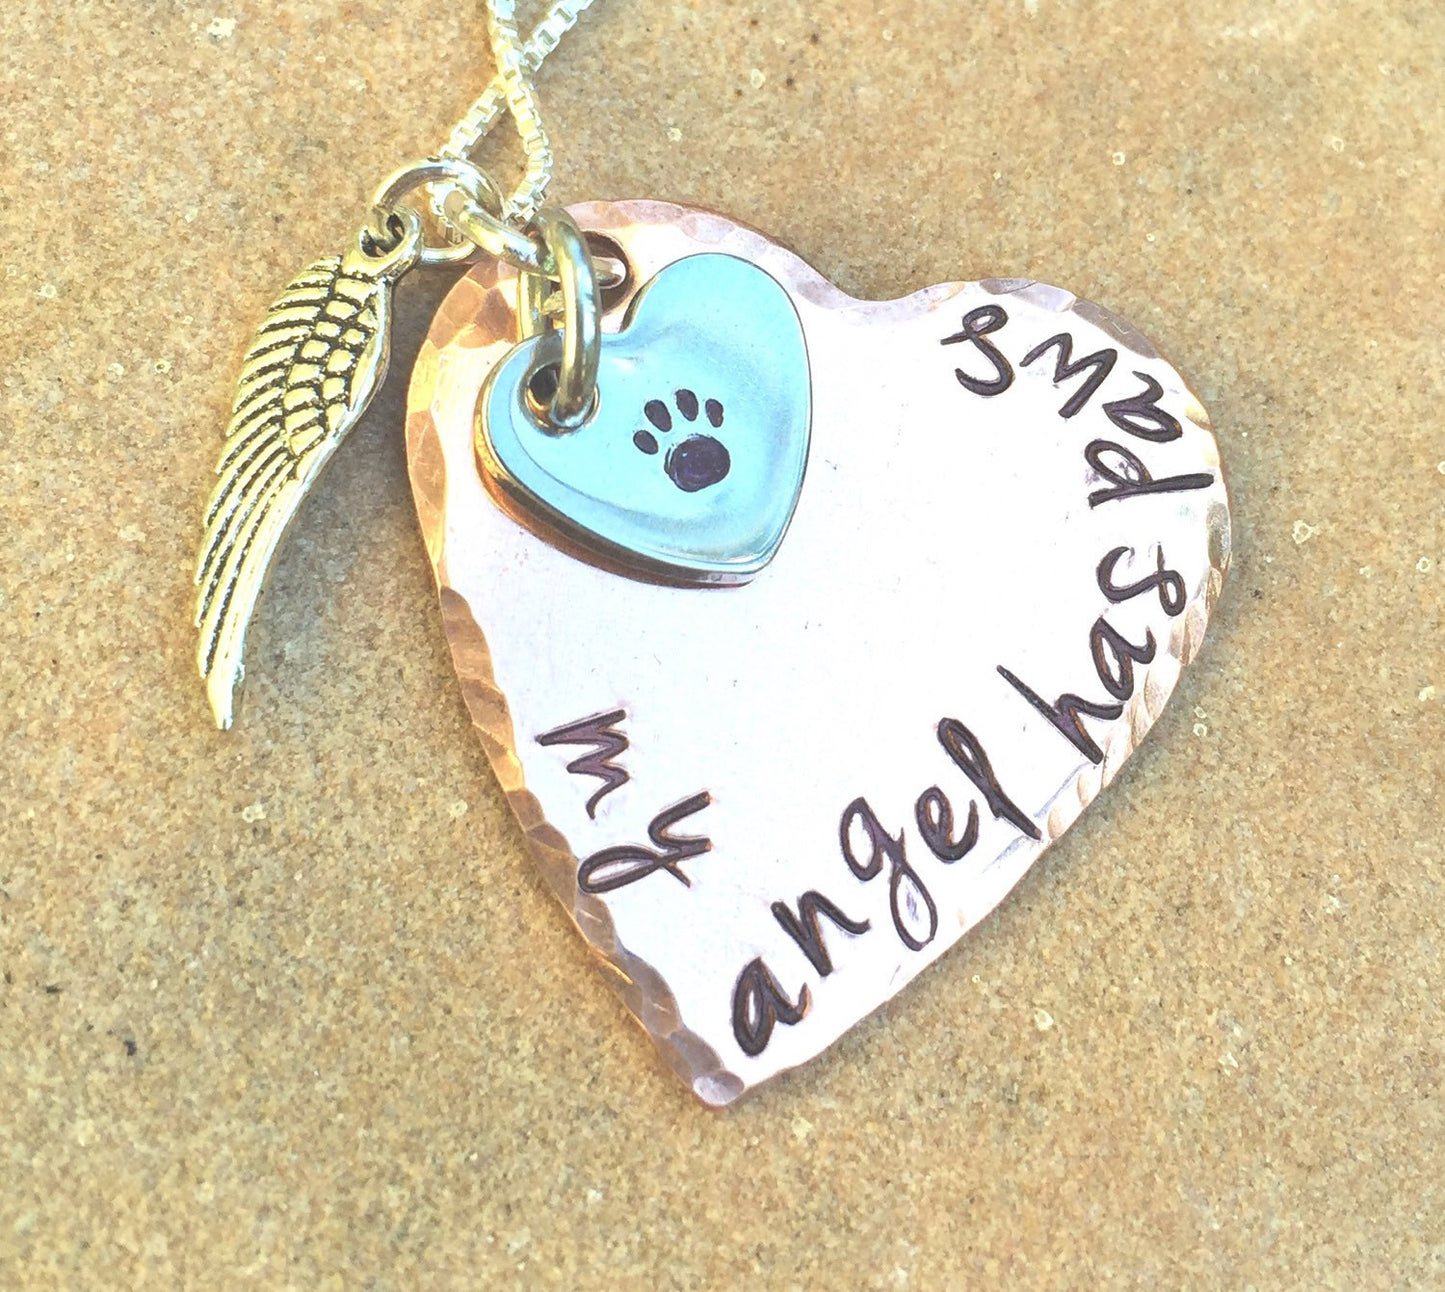 My Angel Has Paws, Pet Memorial, Furever in my heart Necklace, miss my pet, sympathy pet gift, natashaaloha - Natashaaloha, jewelry, bracelets, necklace, keychains, fishing lures, gifts for men, charms, personalized, 